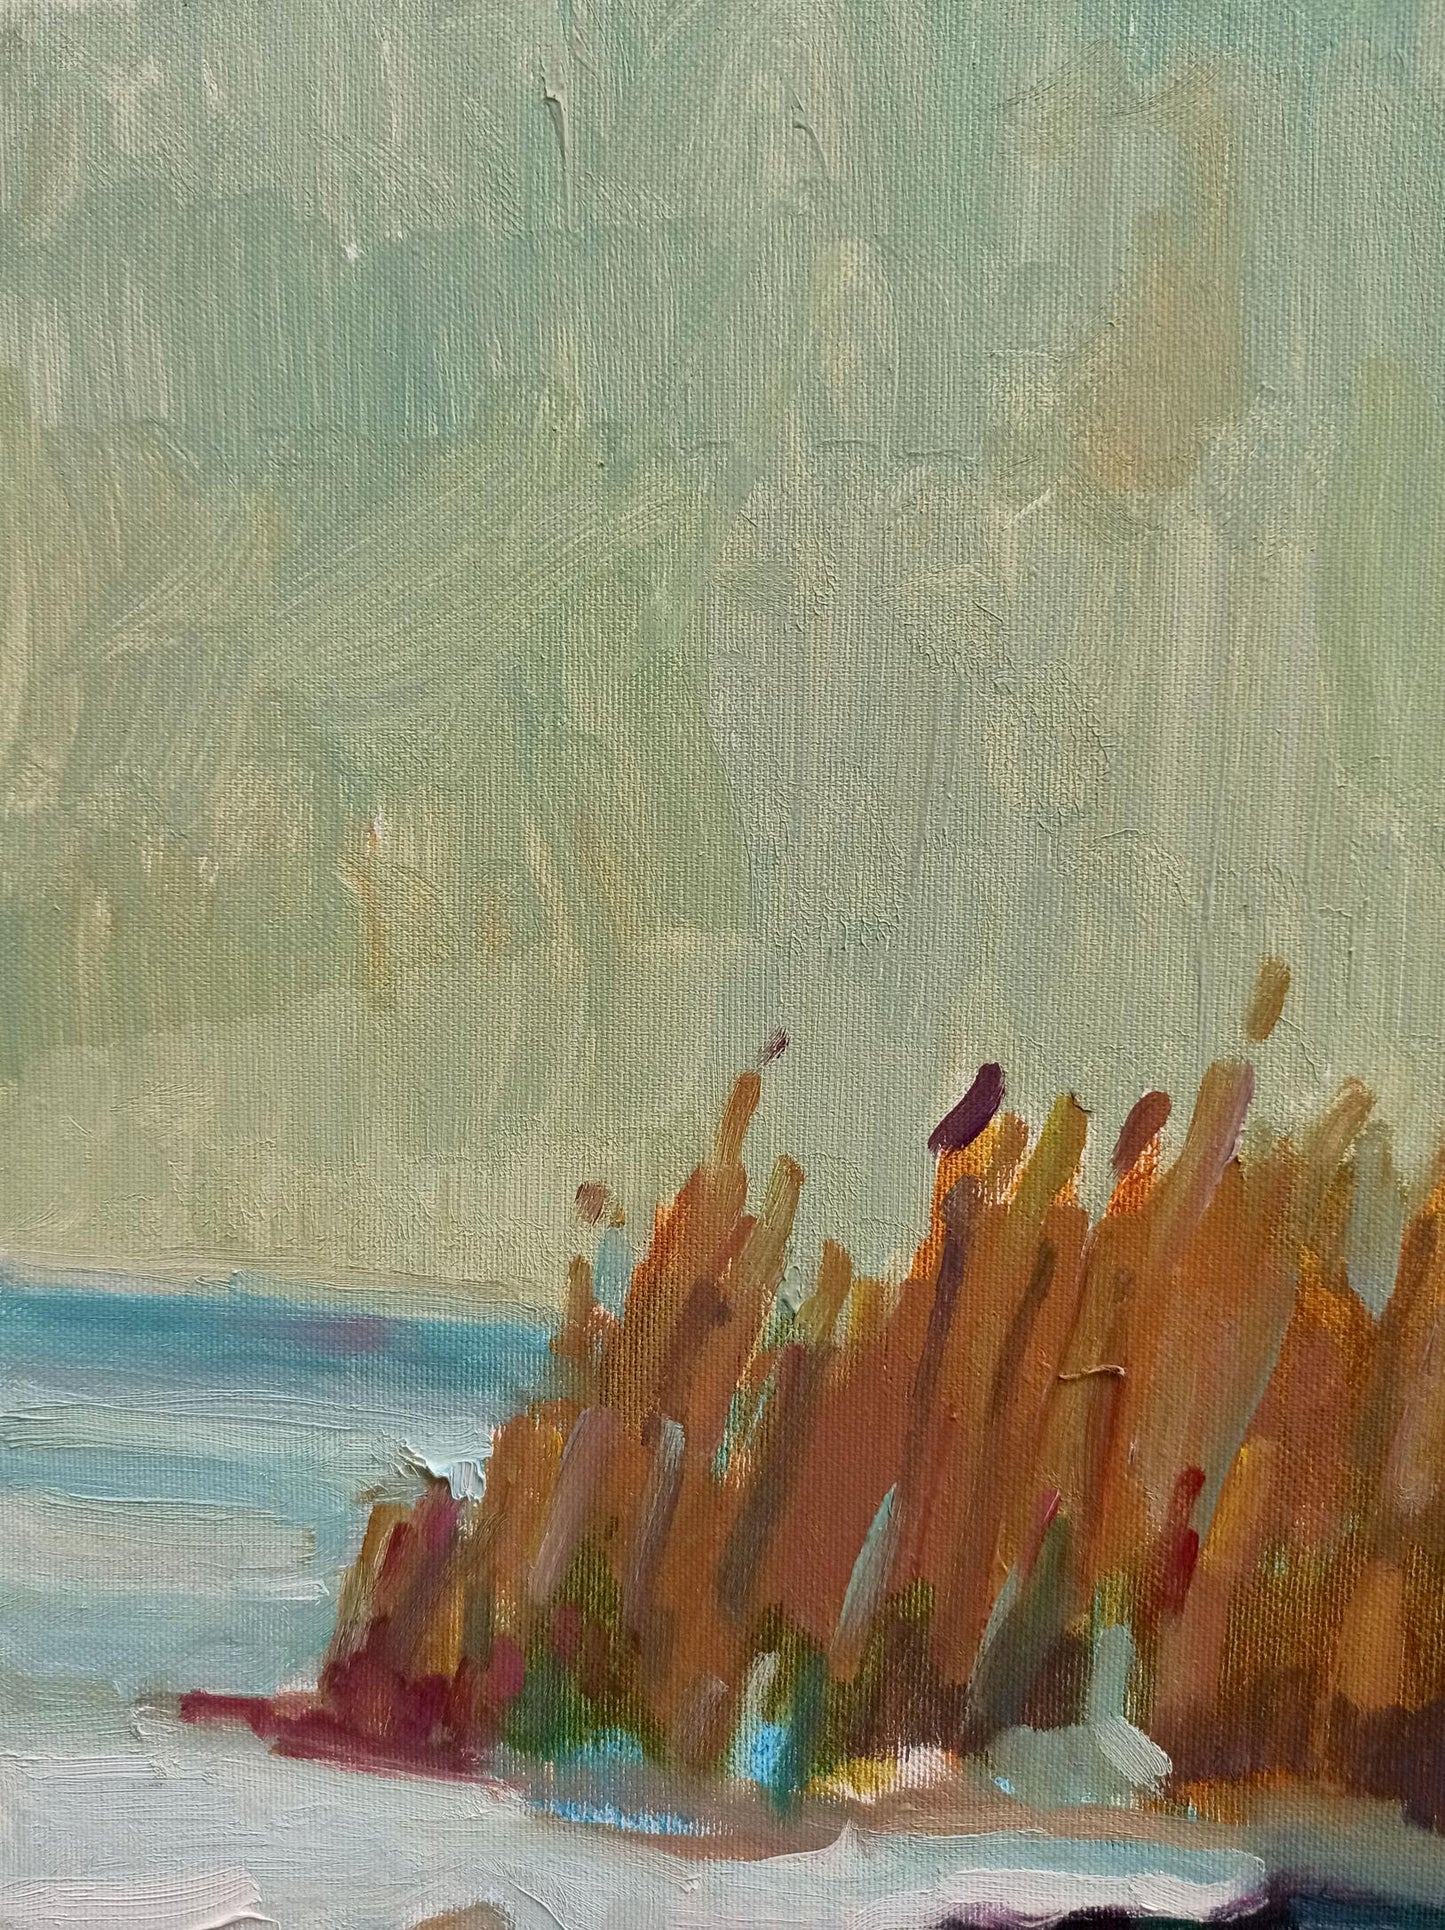 Peter Dobrev's oil painting captures the essence of spring